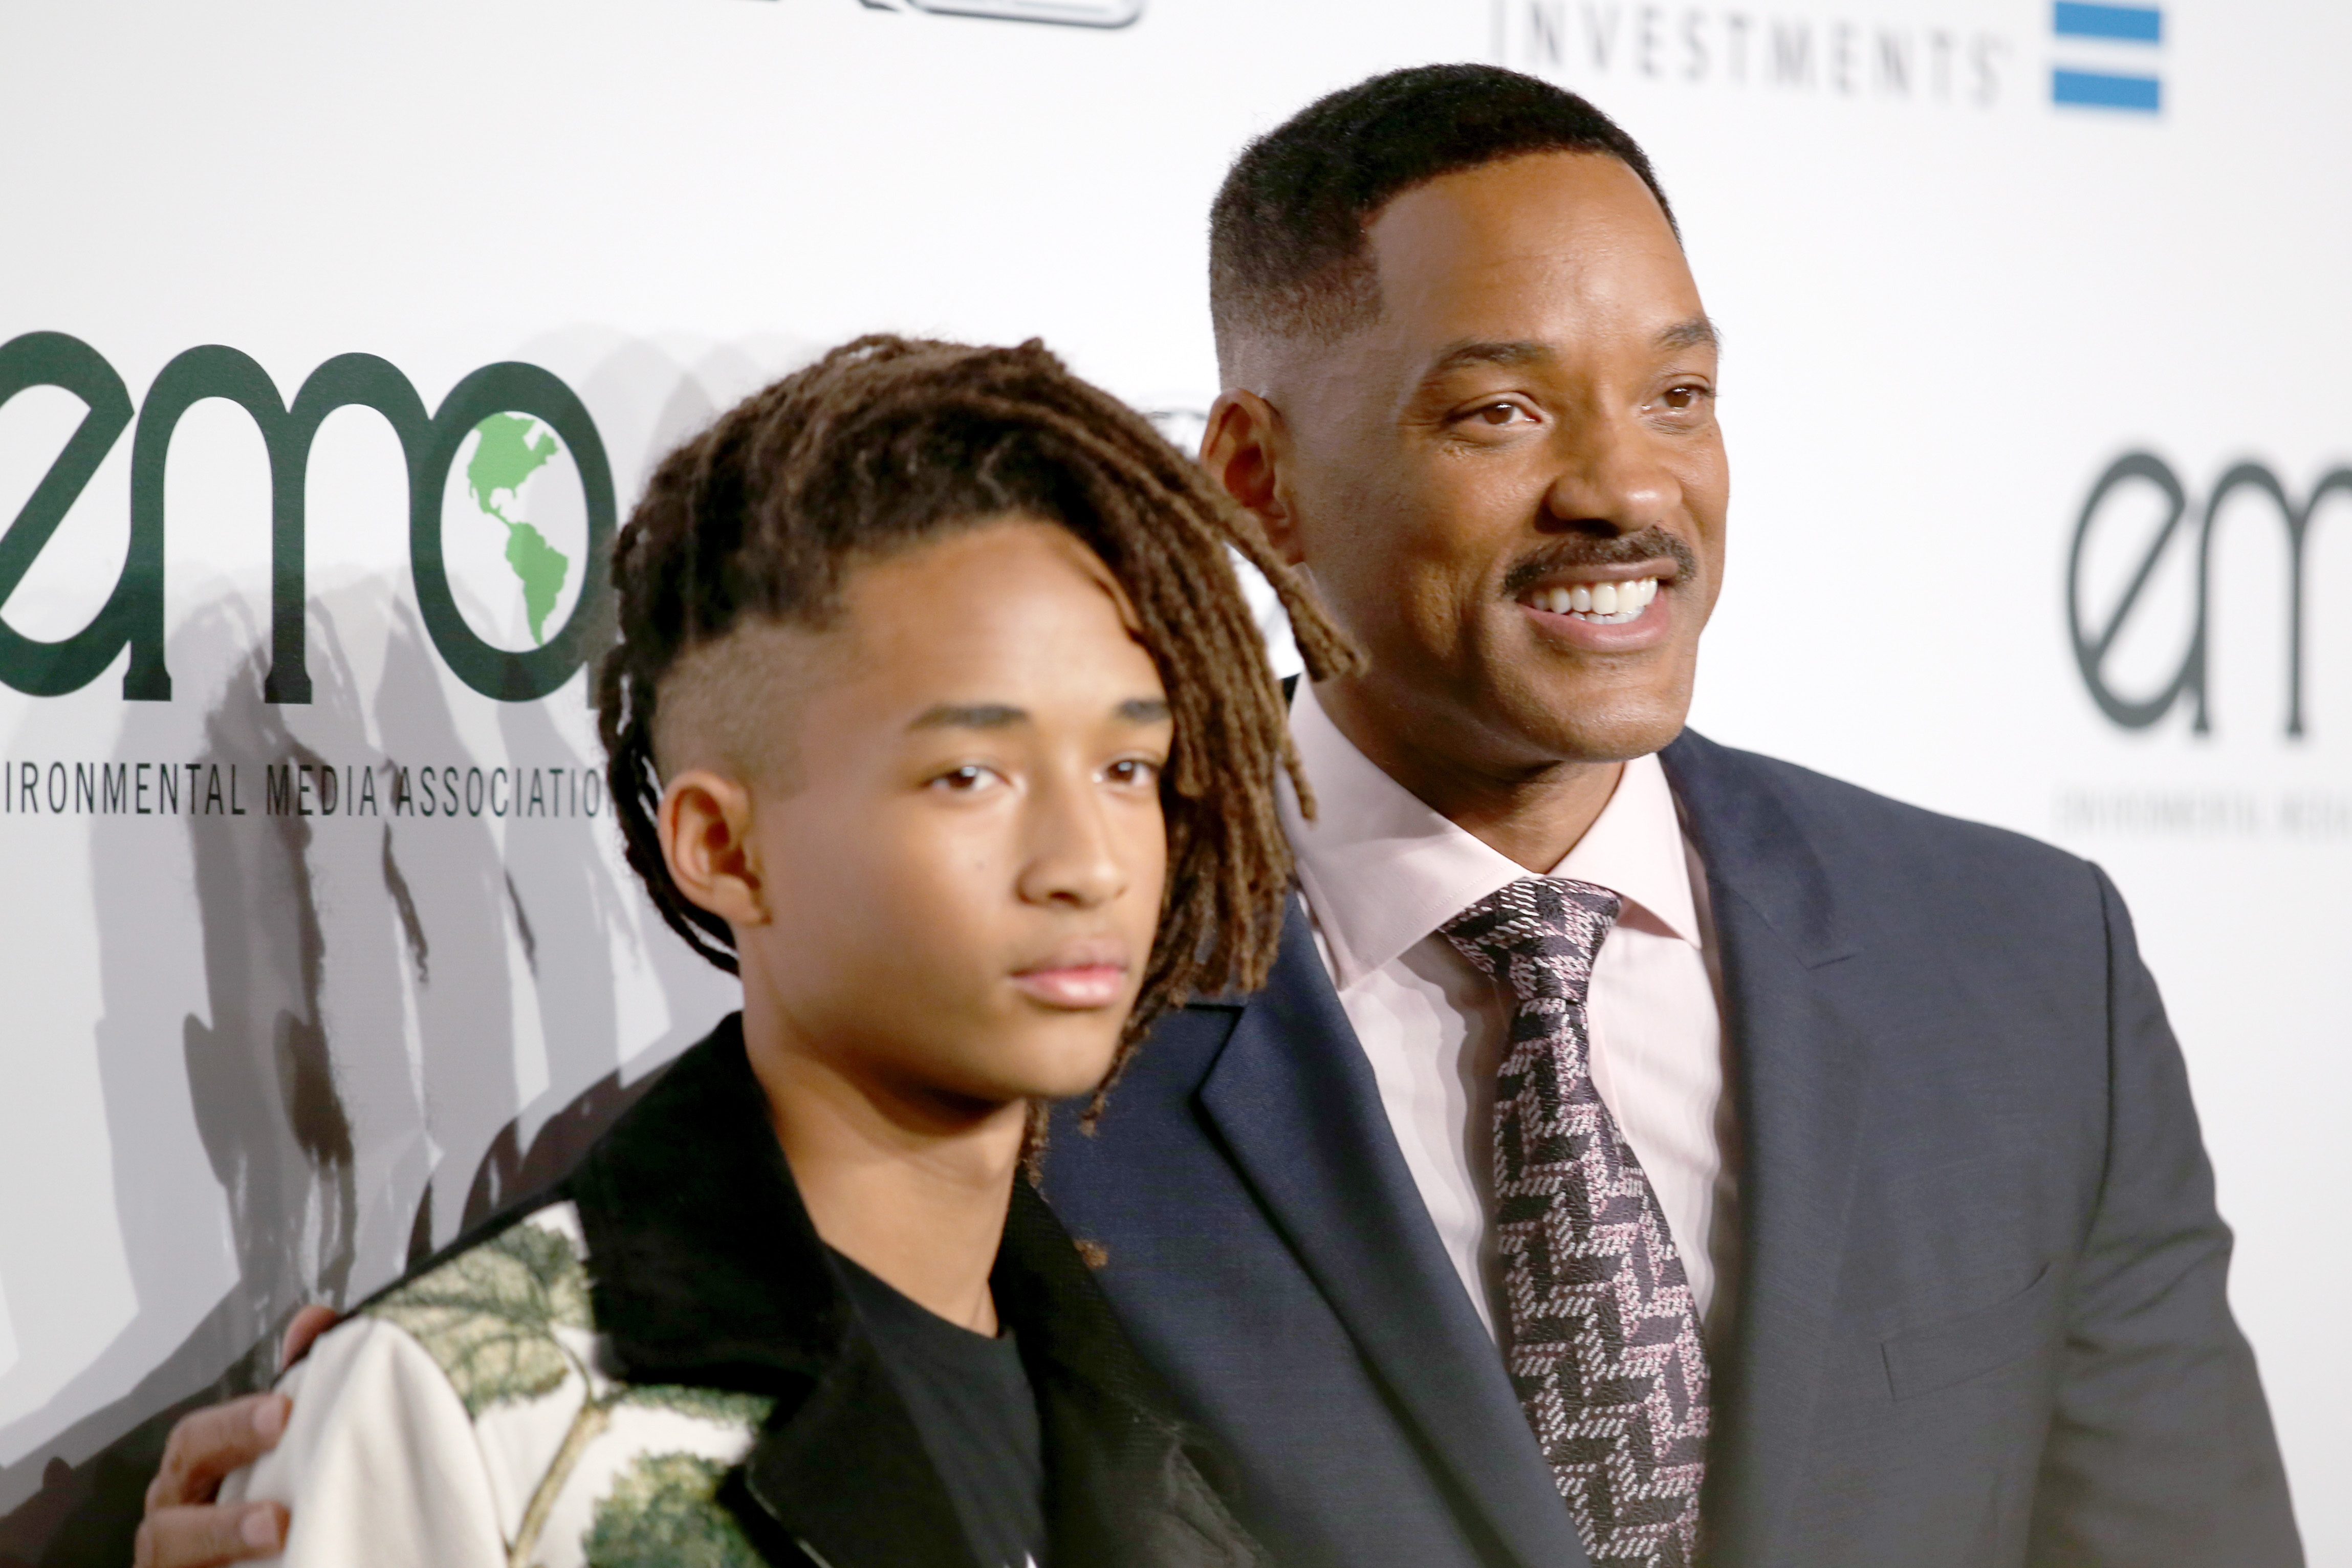 Jaden Smith Dressed as Batman for Prom – The Hollywood Reporter